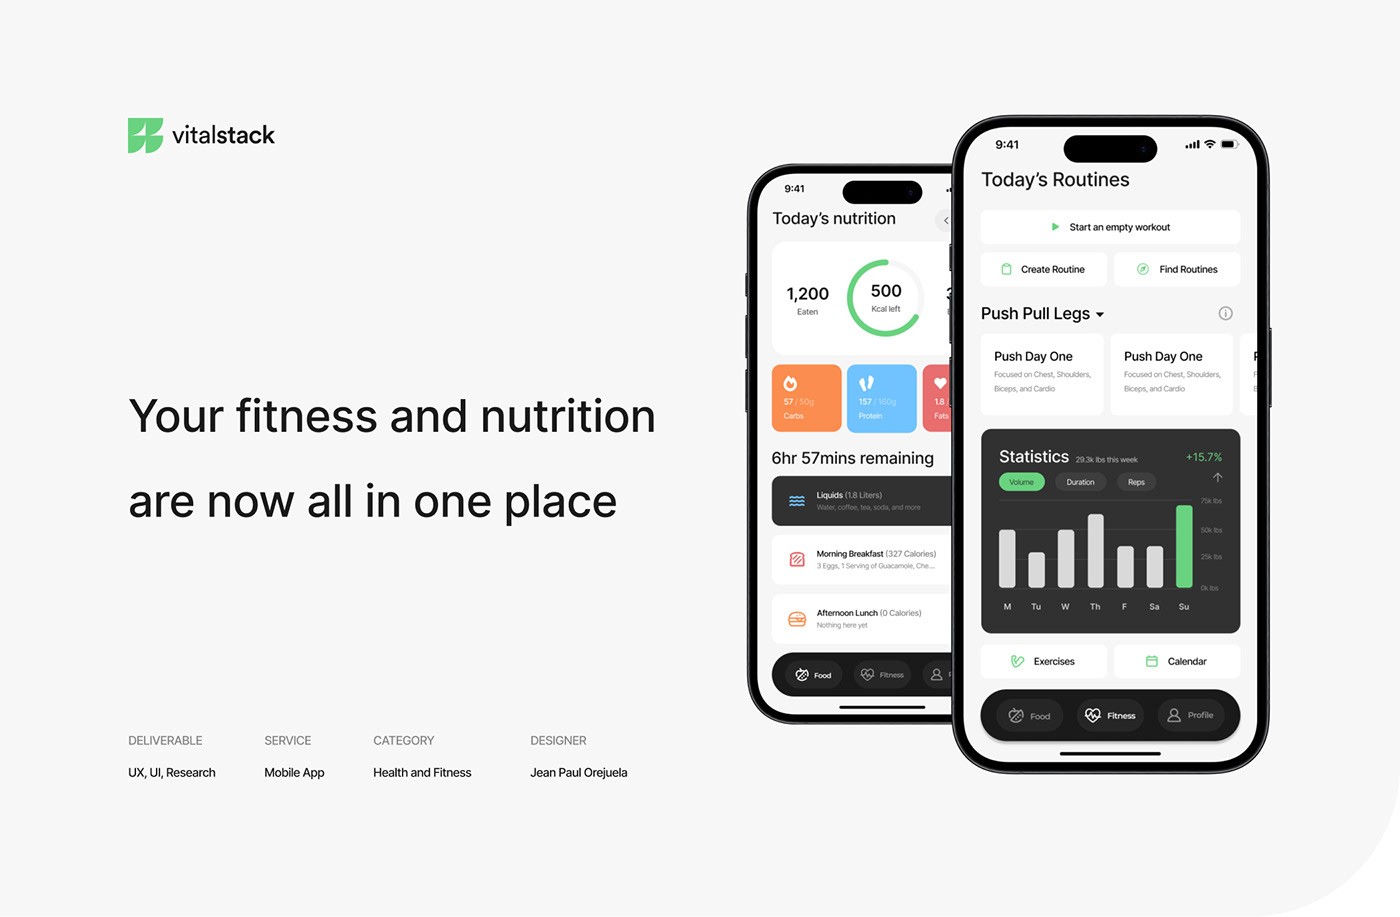 fitness Health gym nutrition ui design Mobile app app design exercise weight training Weight loss